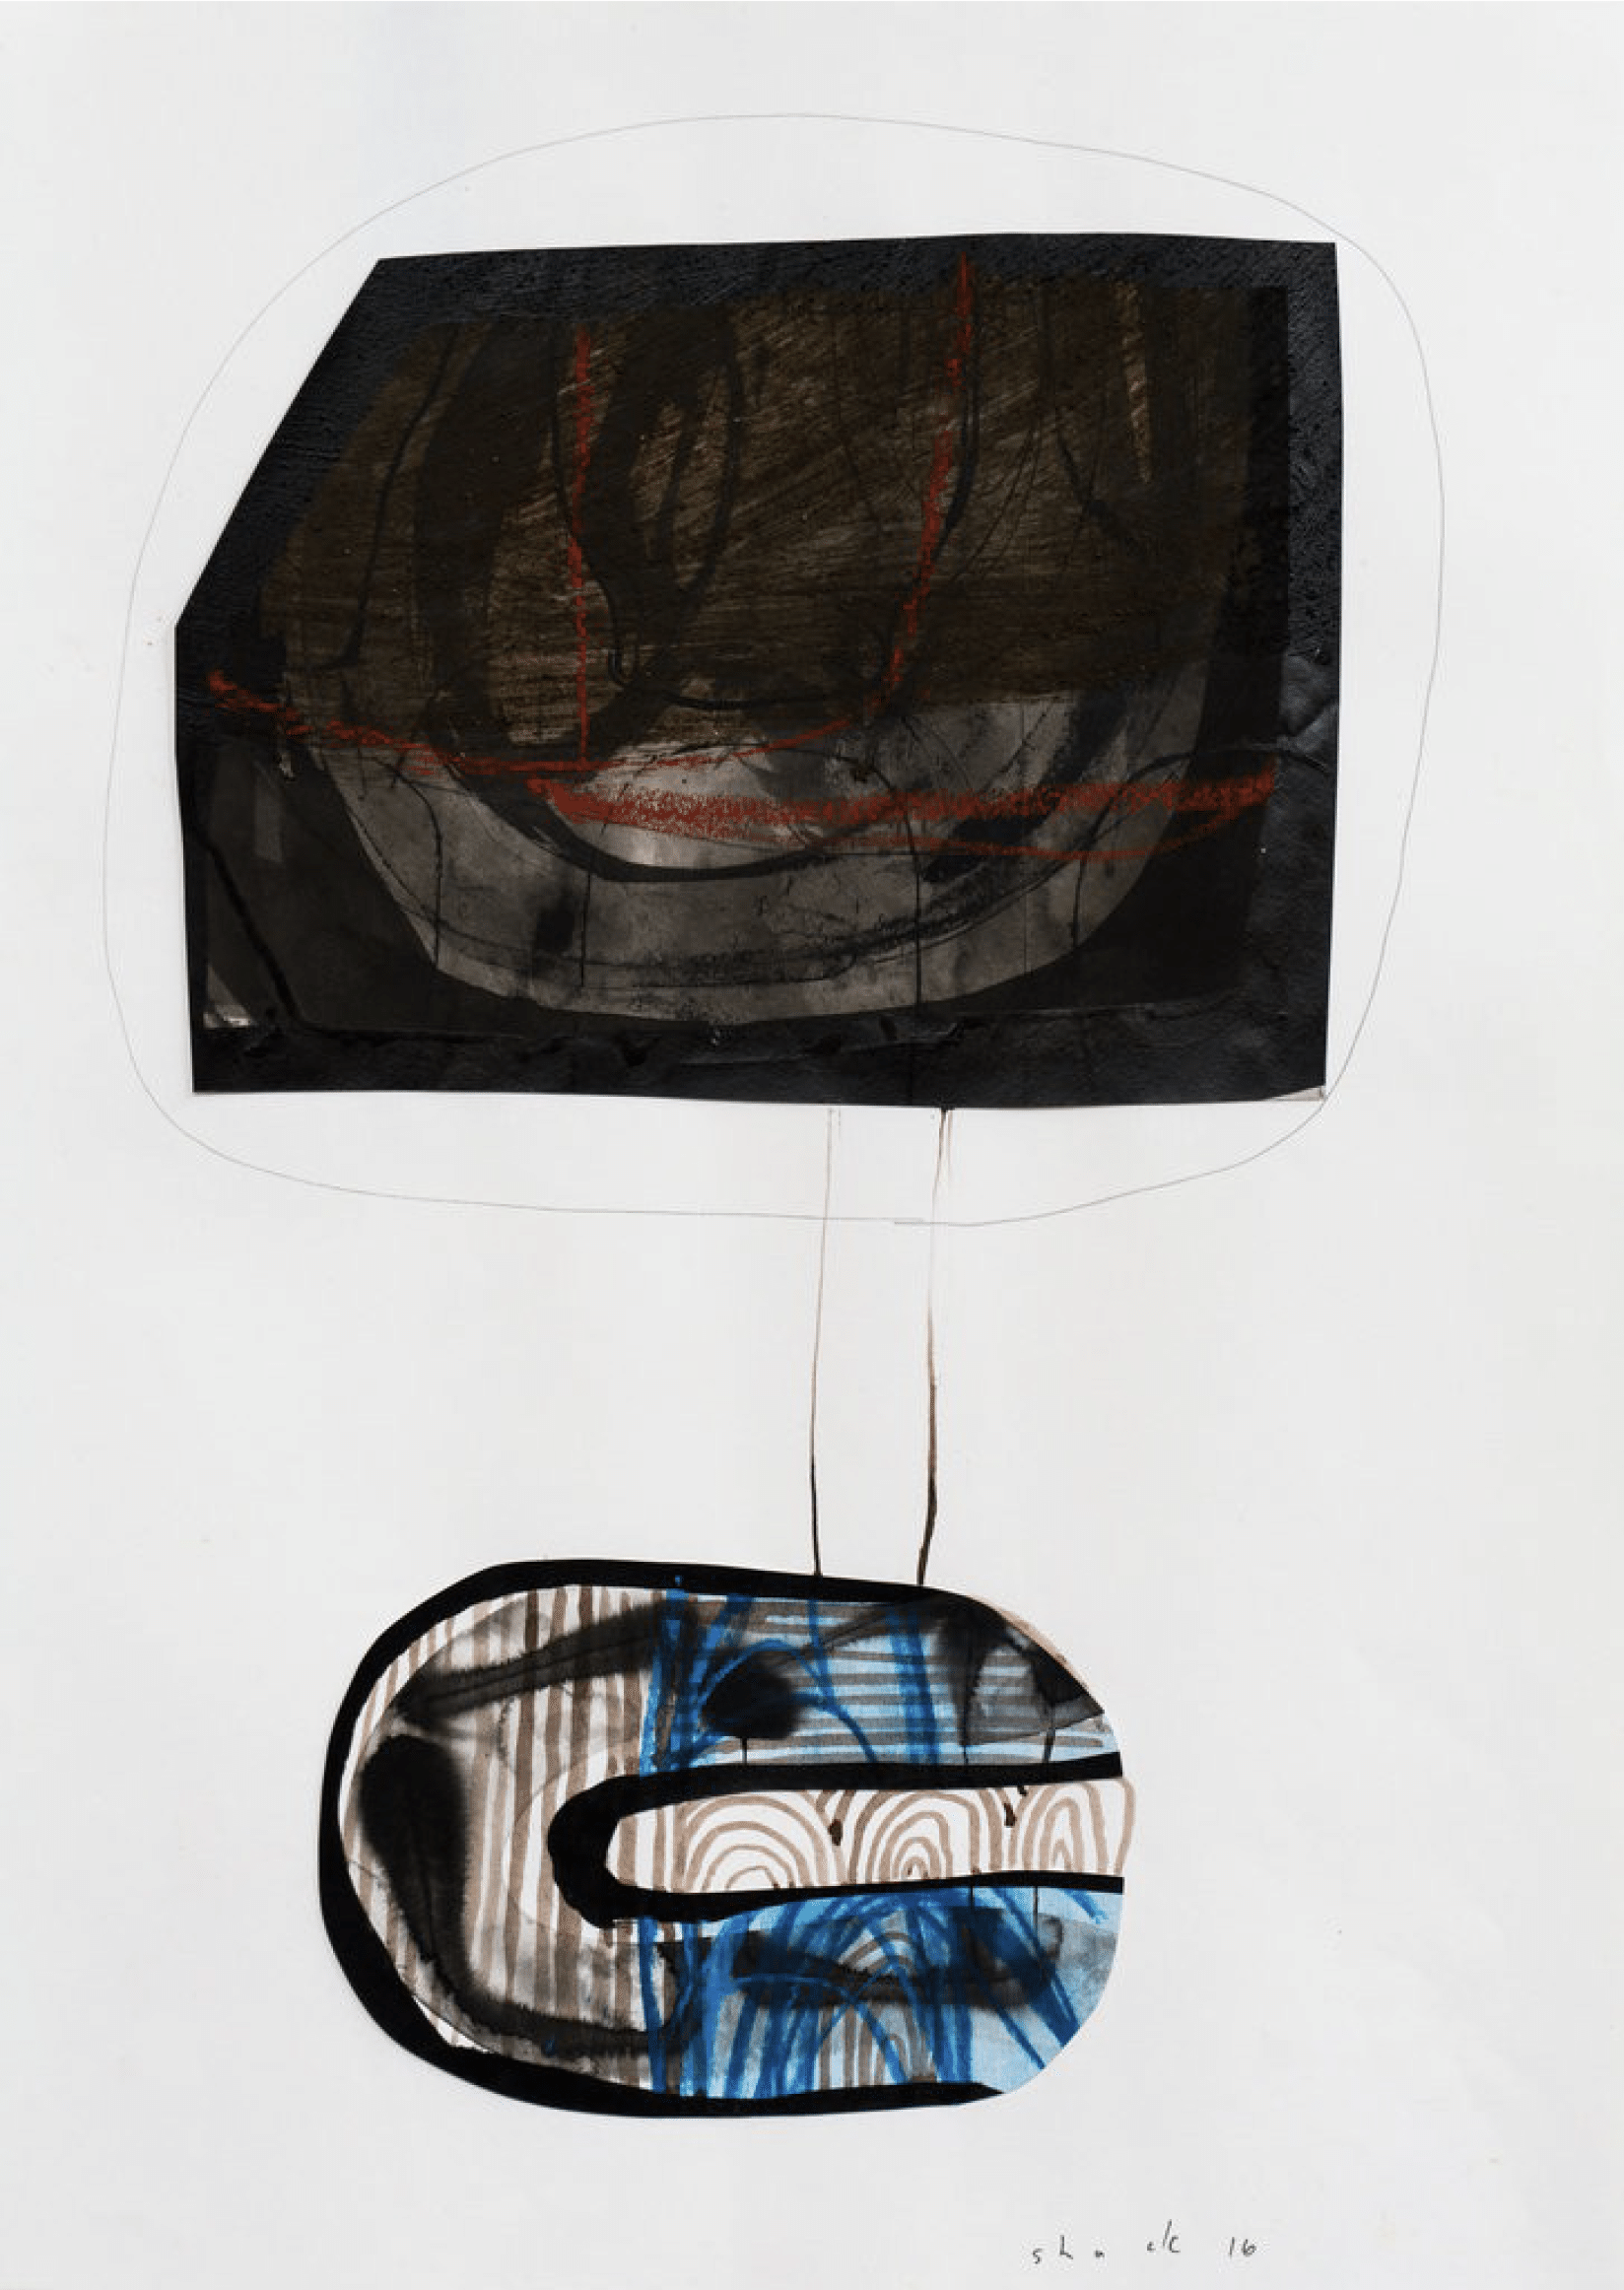 5099Simon Back. Shelter. 2016. Ink, wash and collage on paper. 59 x 42 cm. Courtesy of the Artist and Matter Gallery.